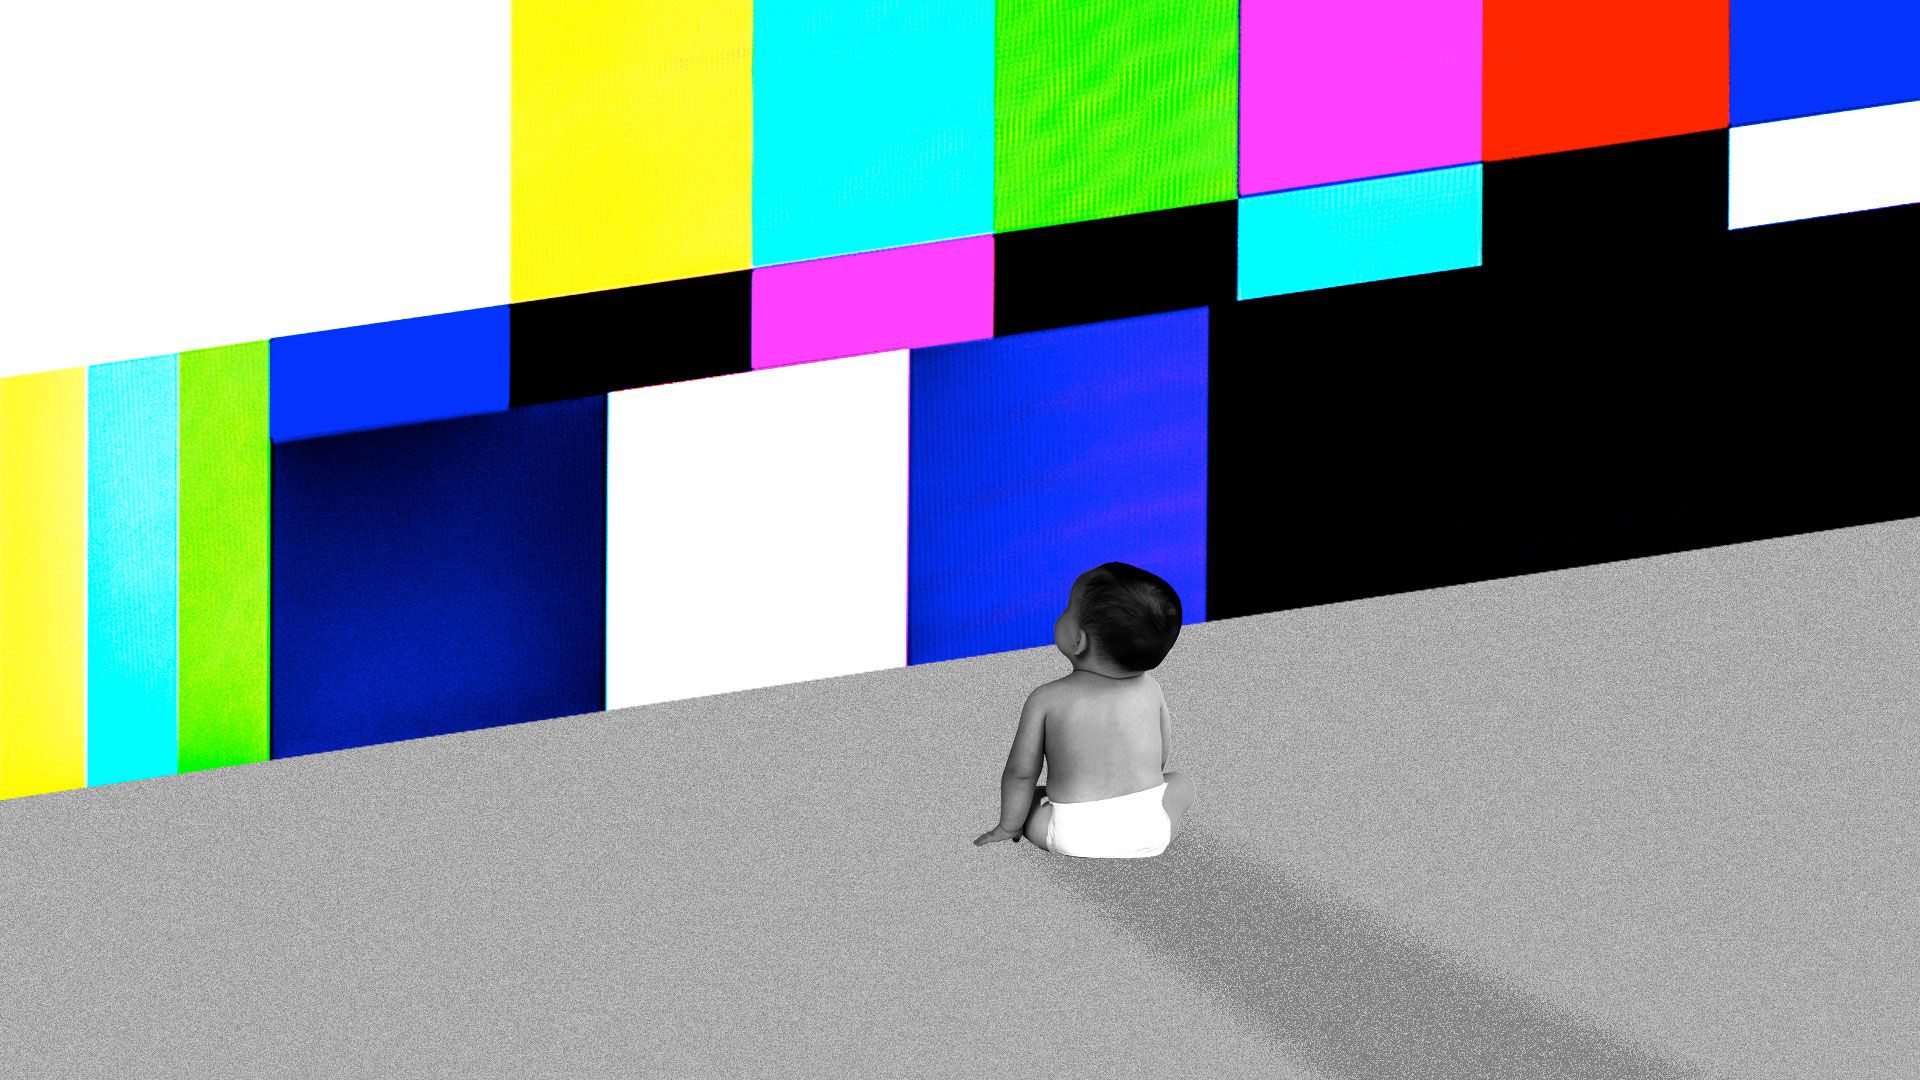 Illustration of a baby in a diaper sitting on floor in front of a huge TV screen